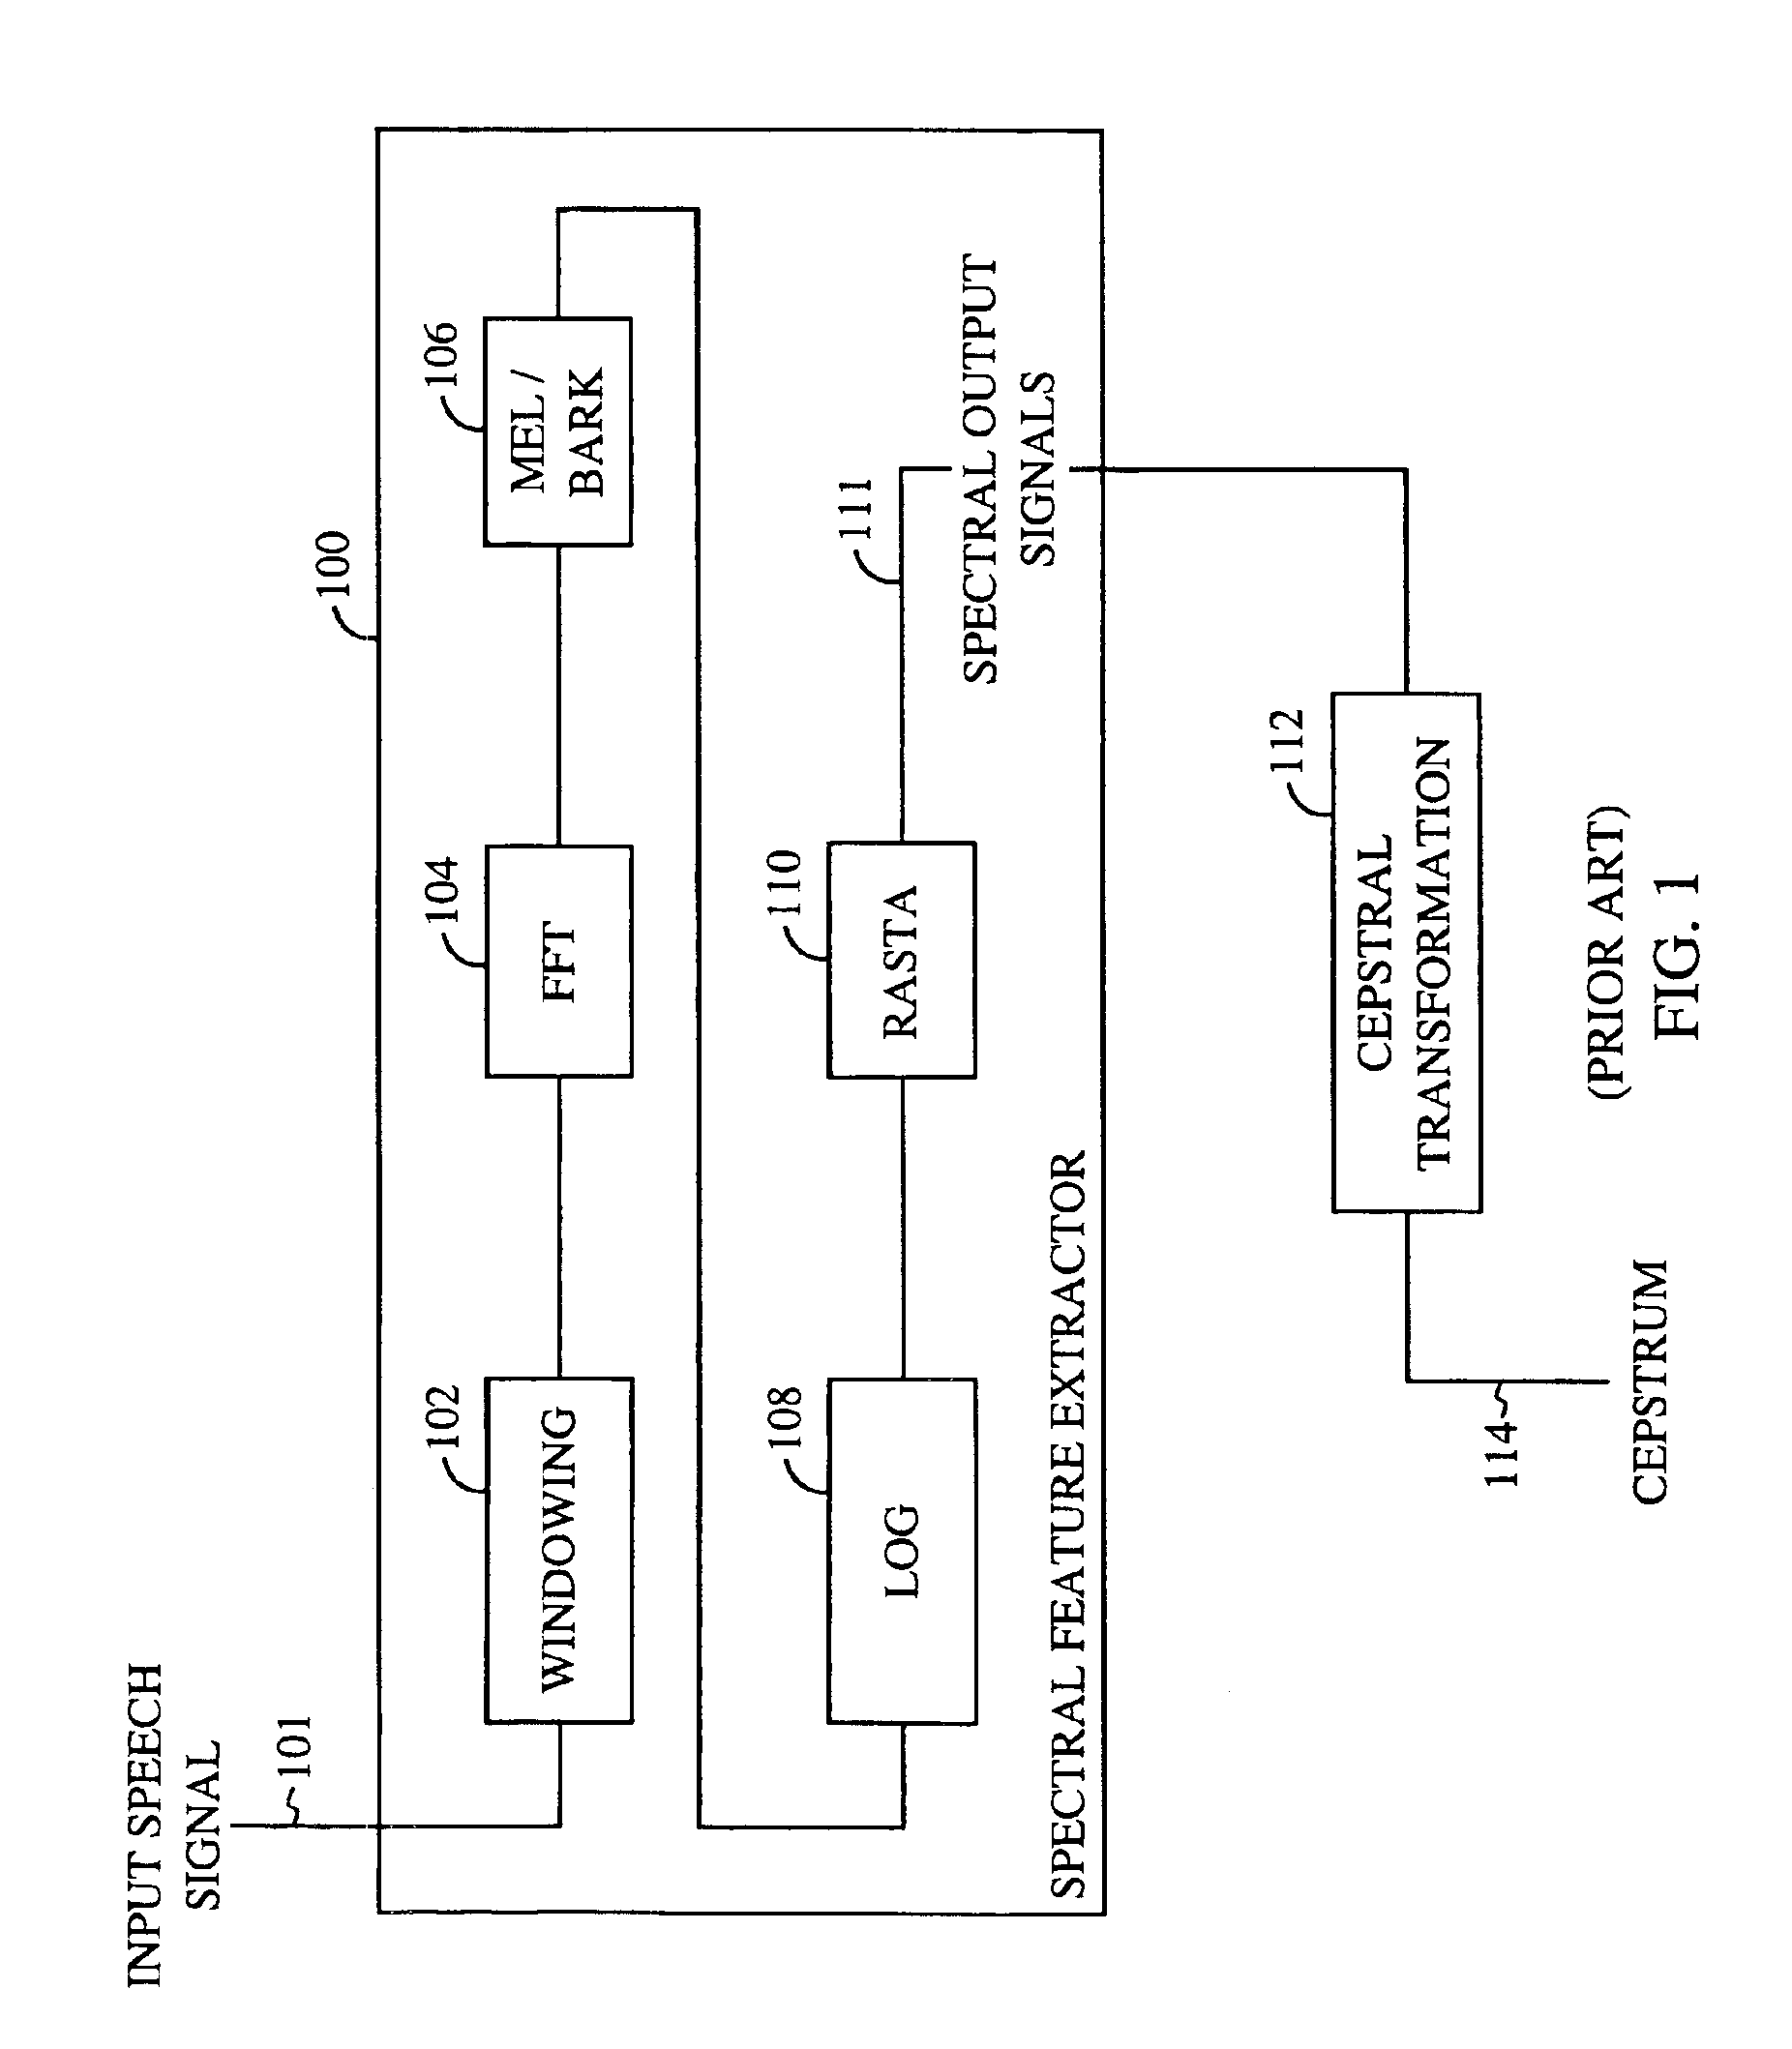 Method for robust voice recognition by analyzing redundant features of source signal